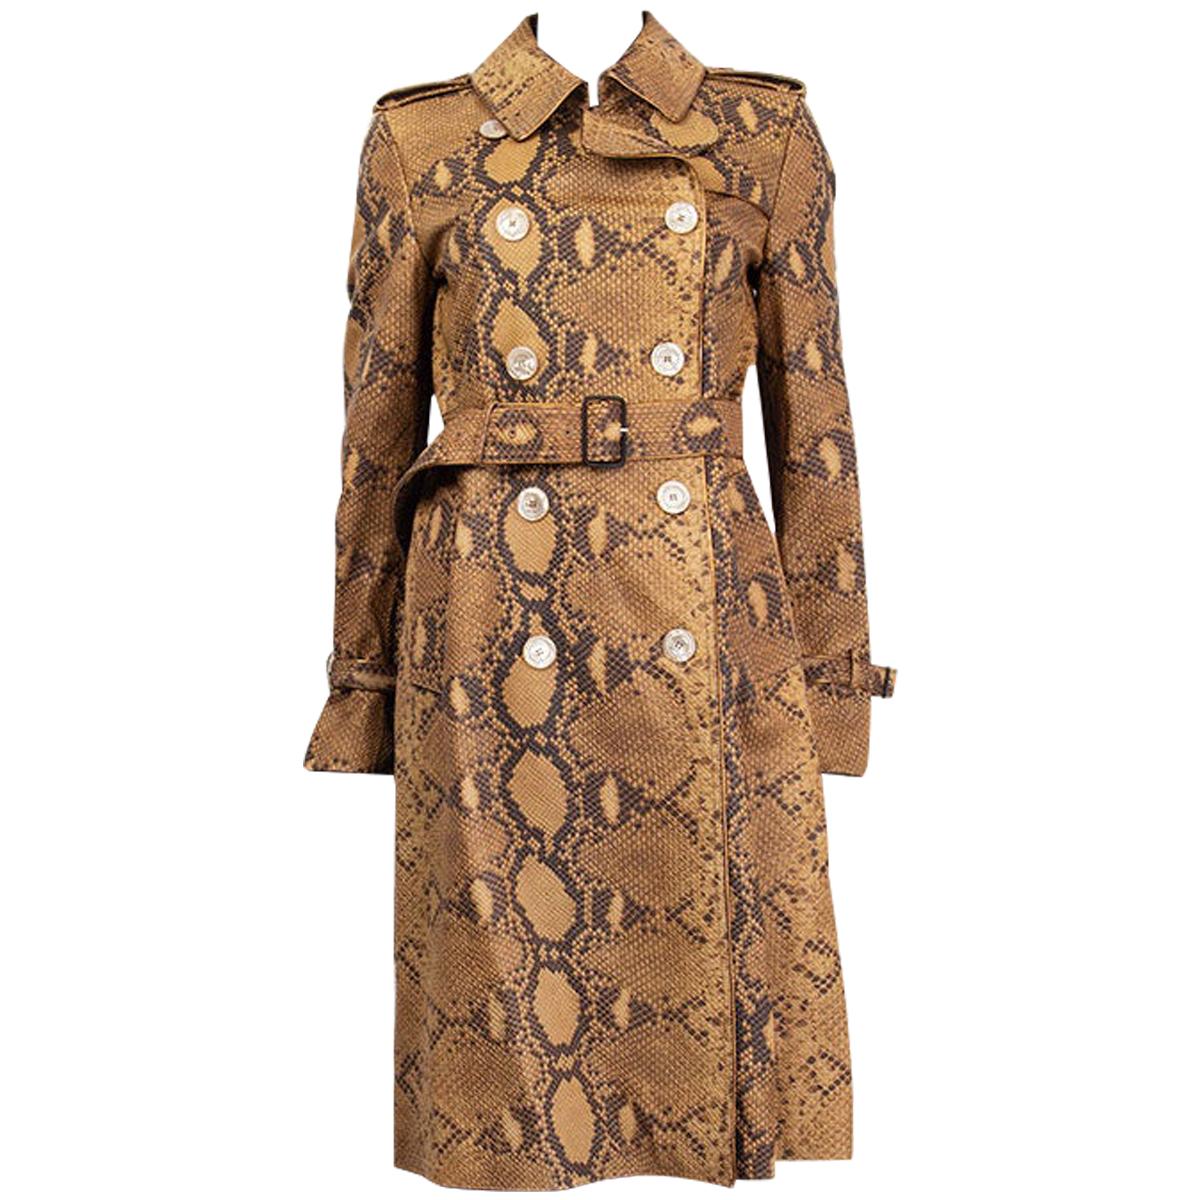 GUCCI brown PYTHON PRINT leather TRENCH Coat Jacket 44 L